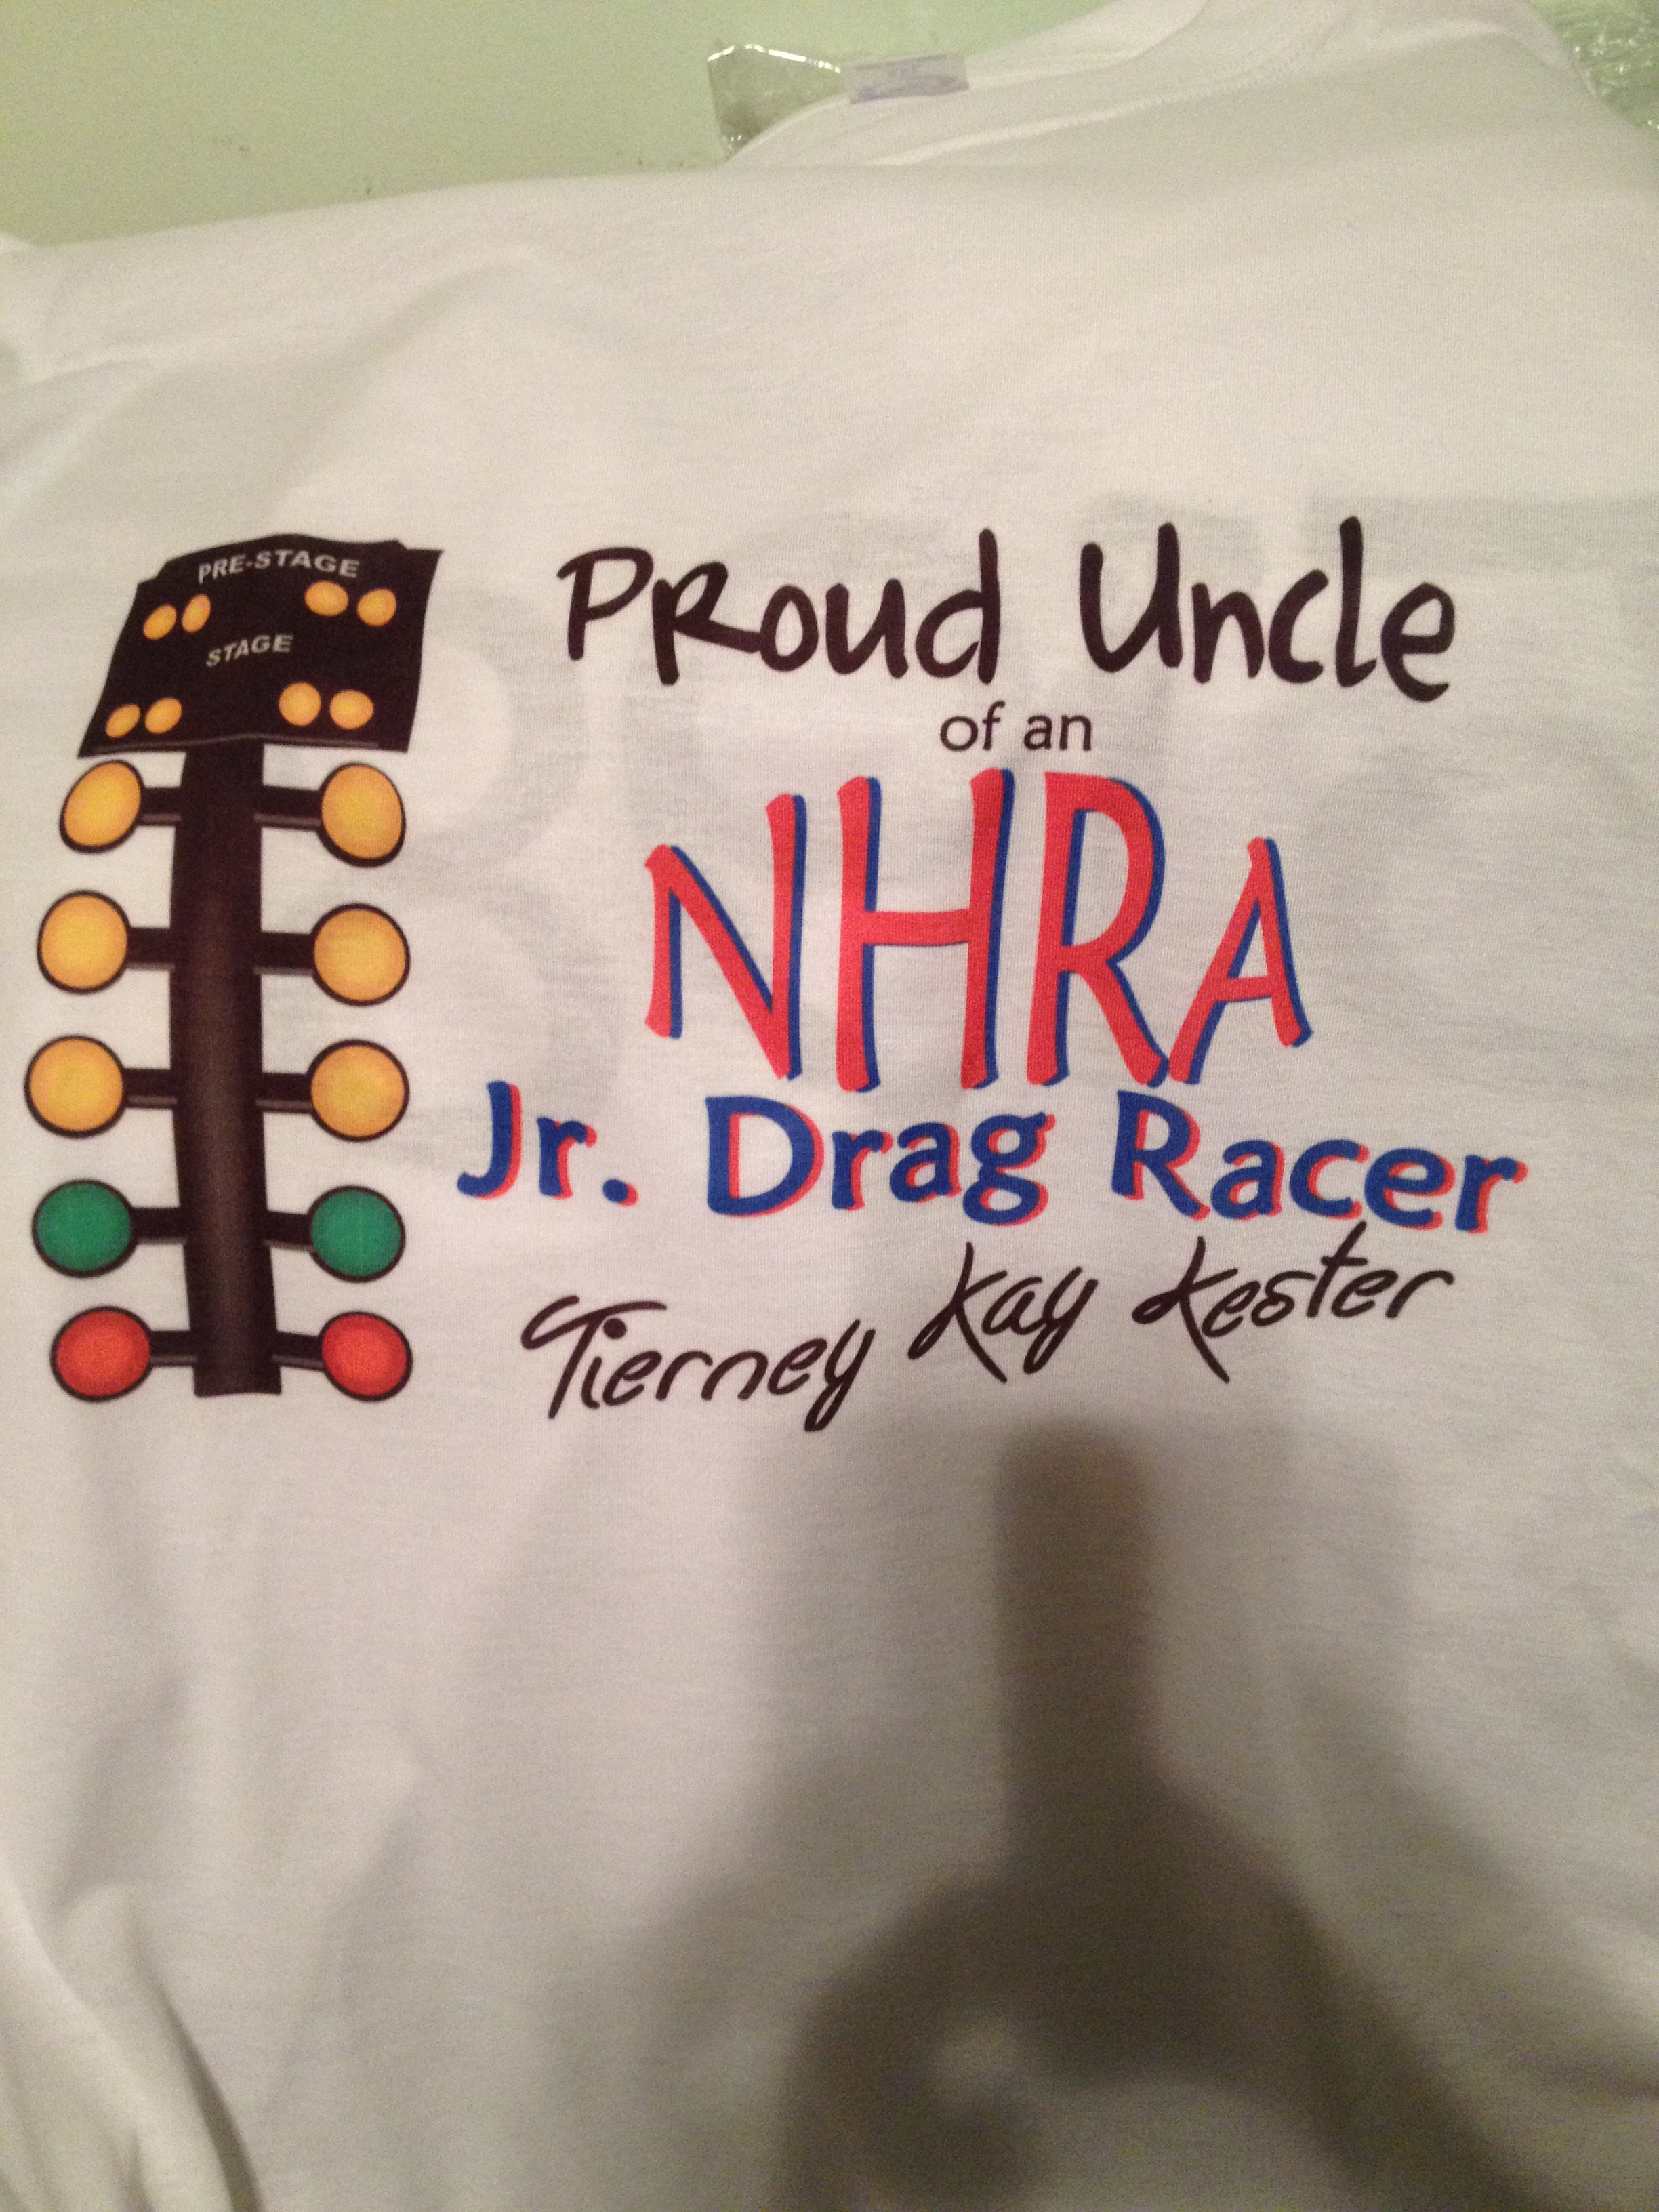 Drag Car Shirt made with sublimation printing